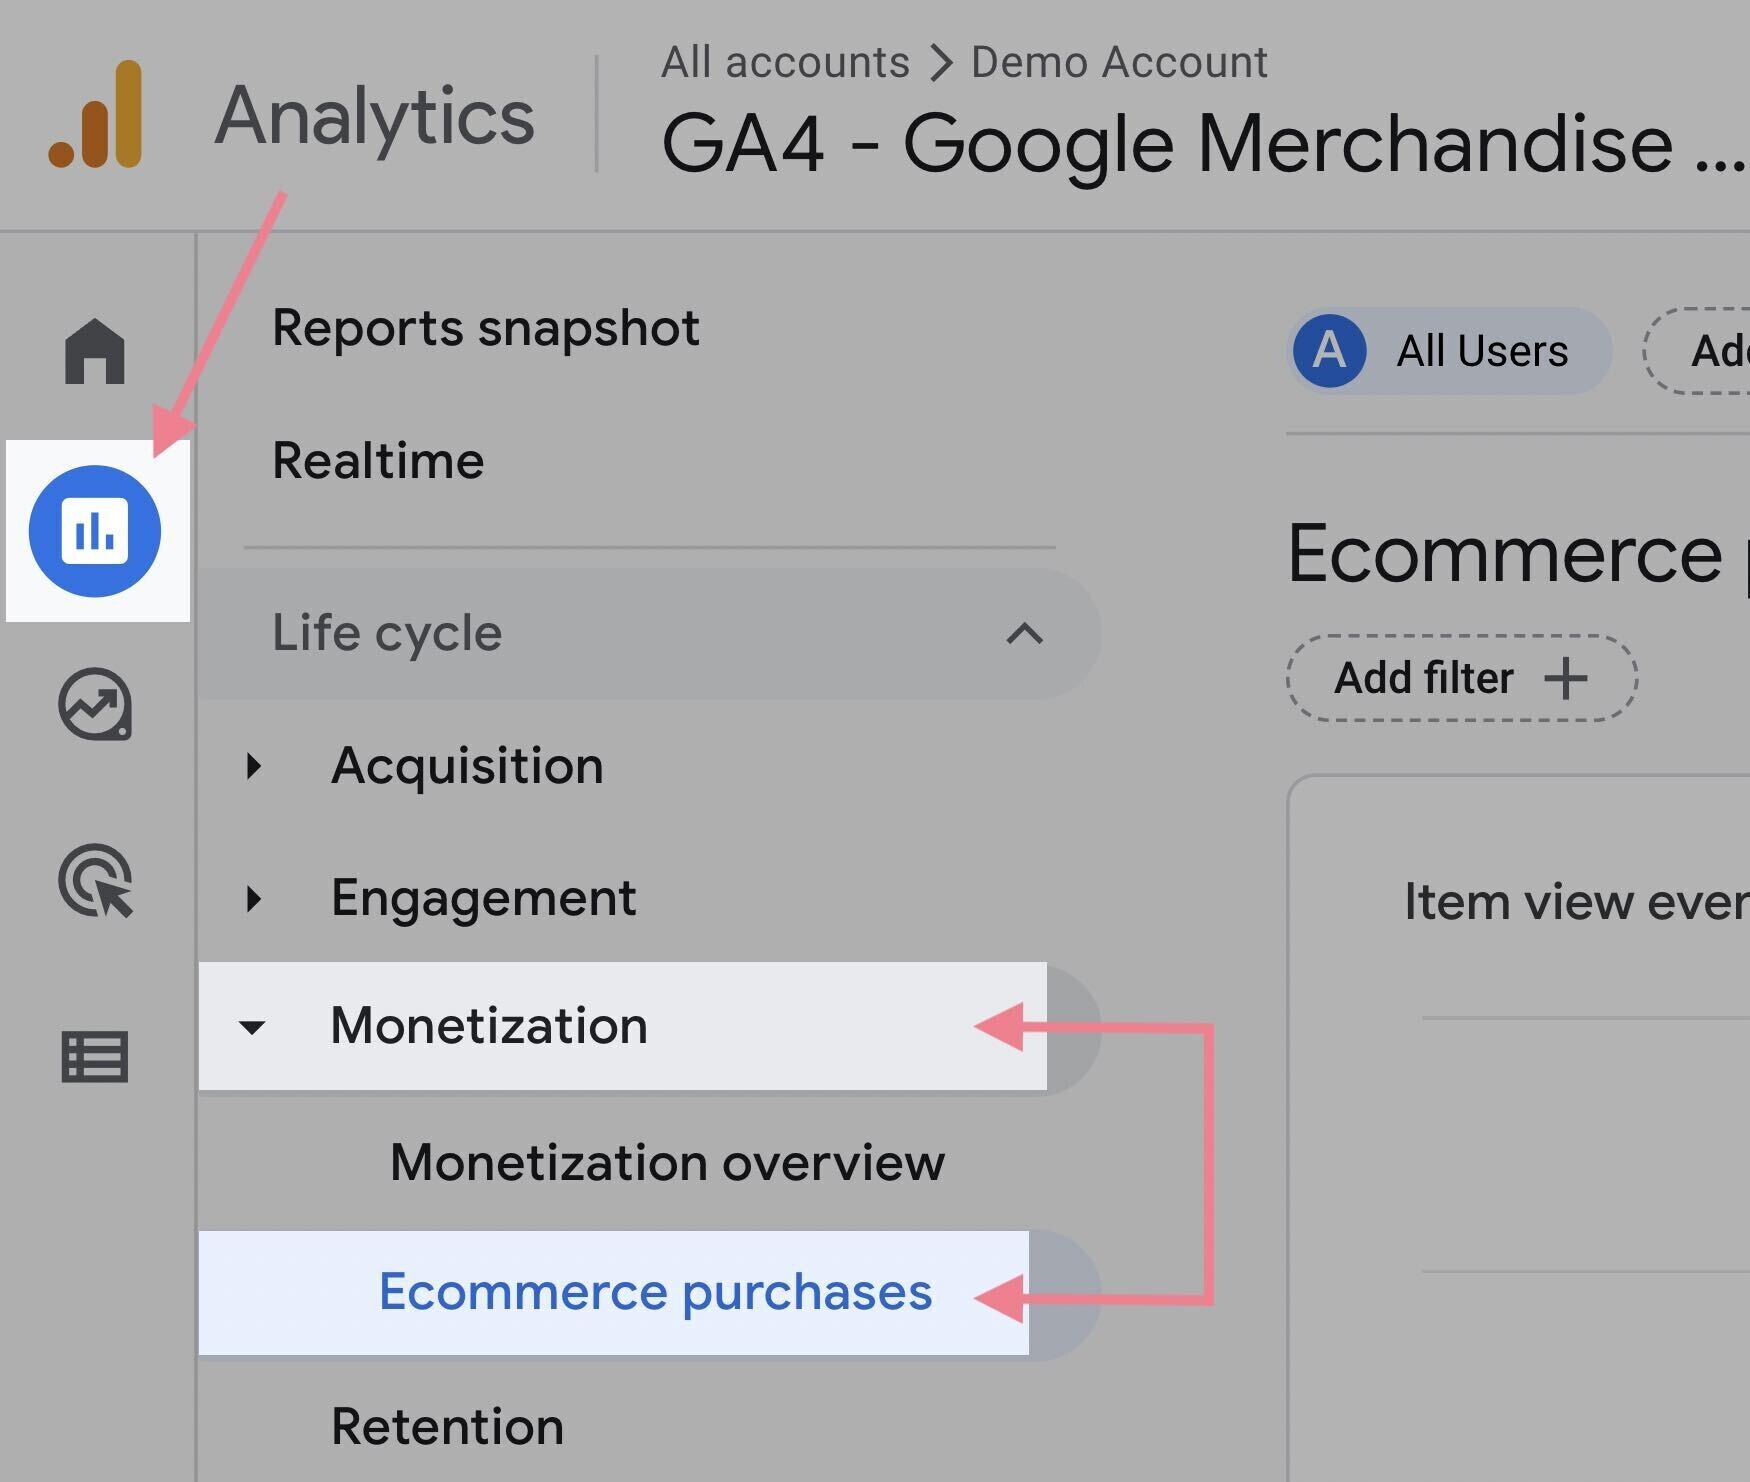 GA4 reports ecommerce purchases